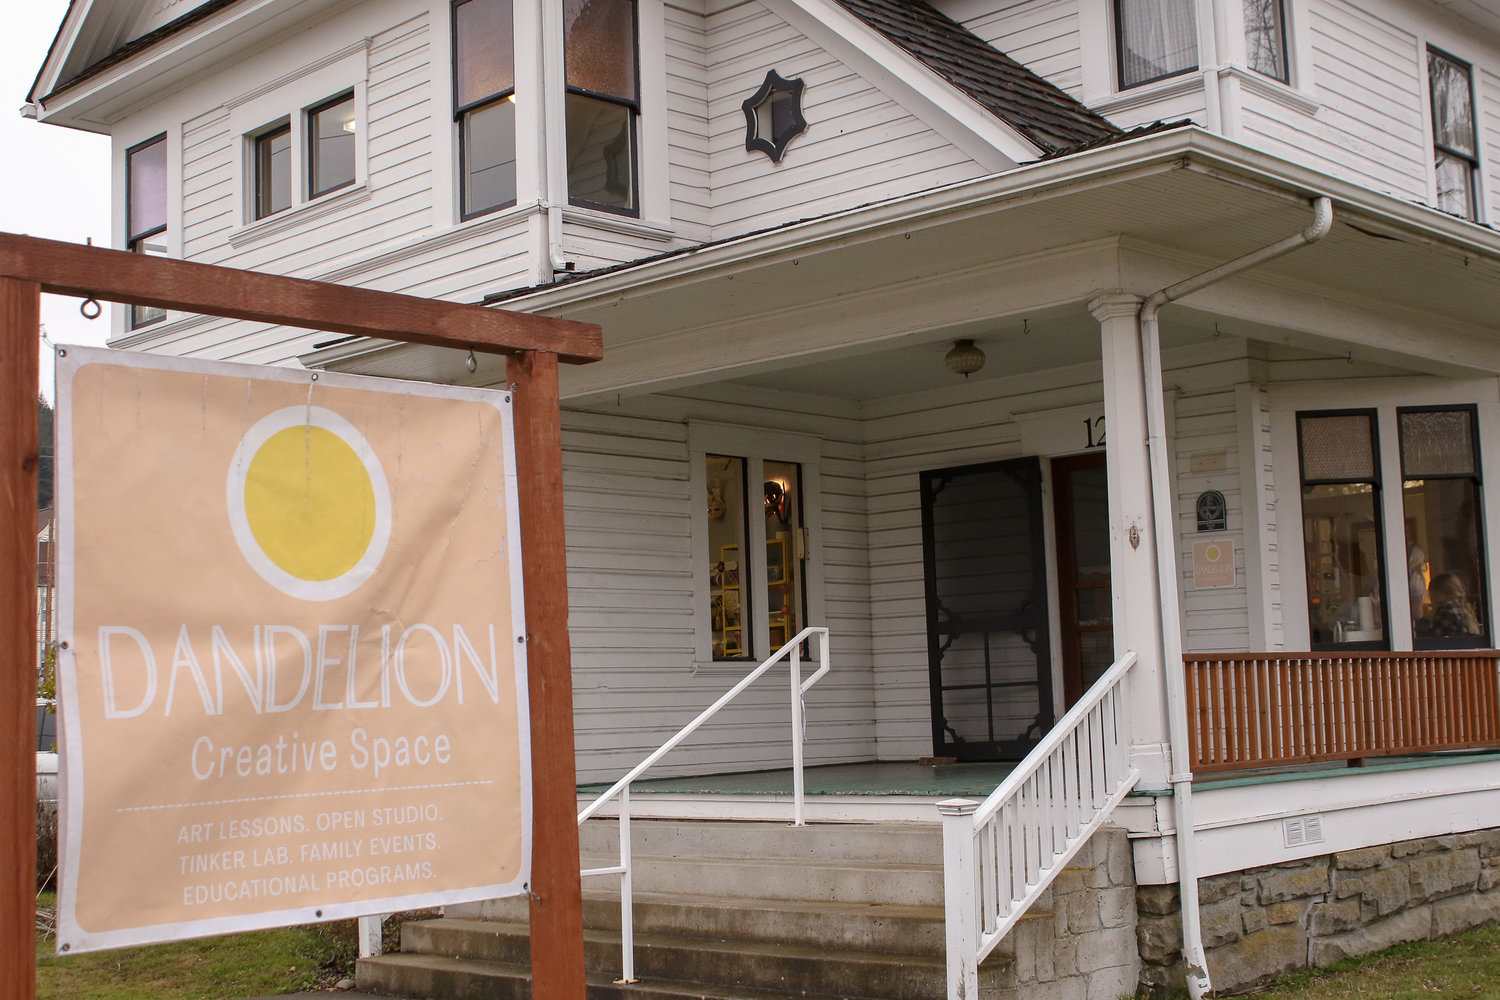 Dandelion Creative Space, a new art studio open that opened in Chehalis on Nov. 5, is located 120 NW Pacific Ave. just across the street from Cupid's Cup Espresso.